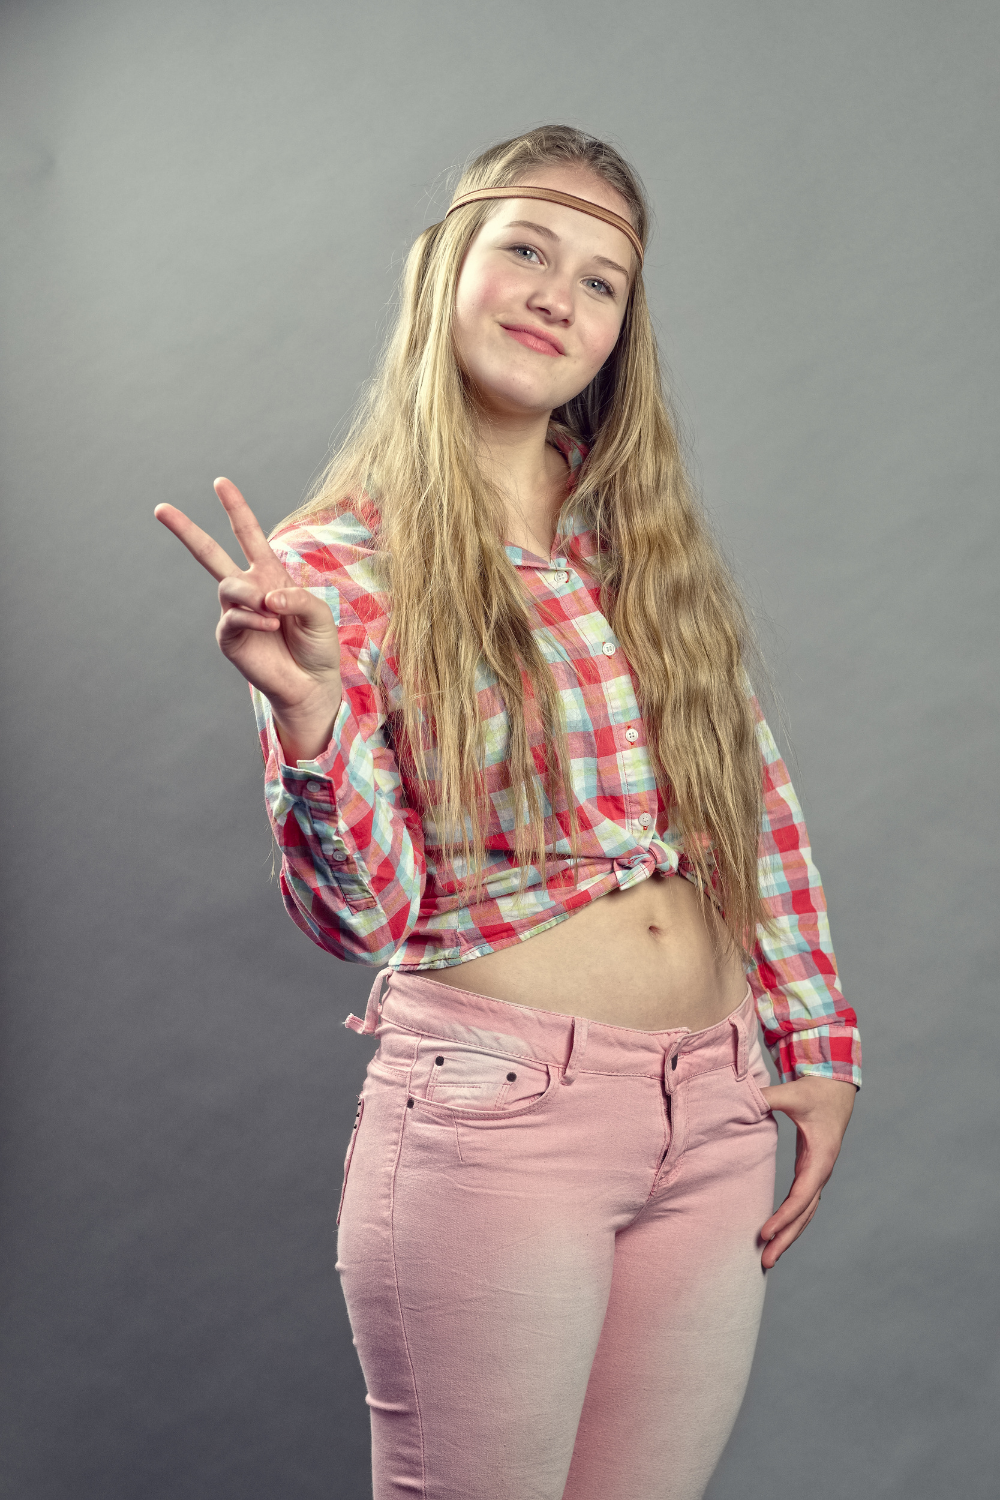 1960s hippie costume style: long straight hair, bell bottoms and peace signs